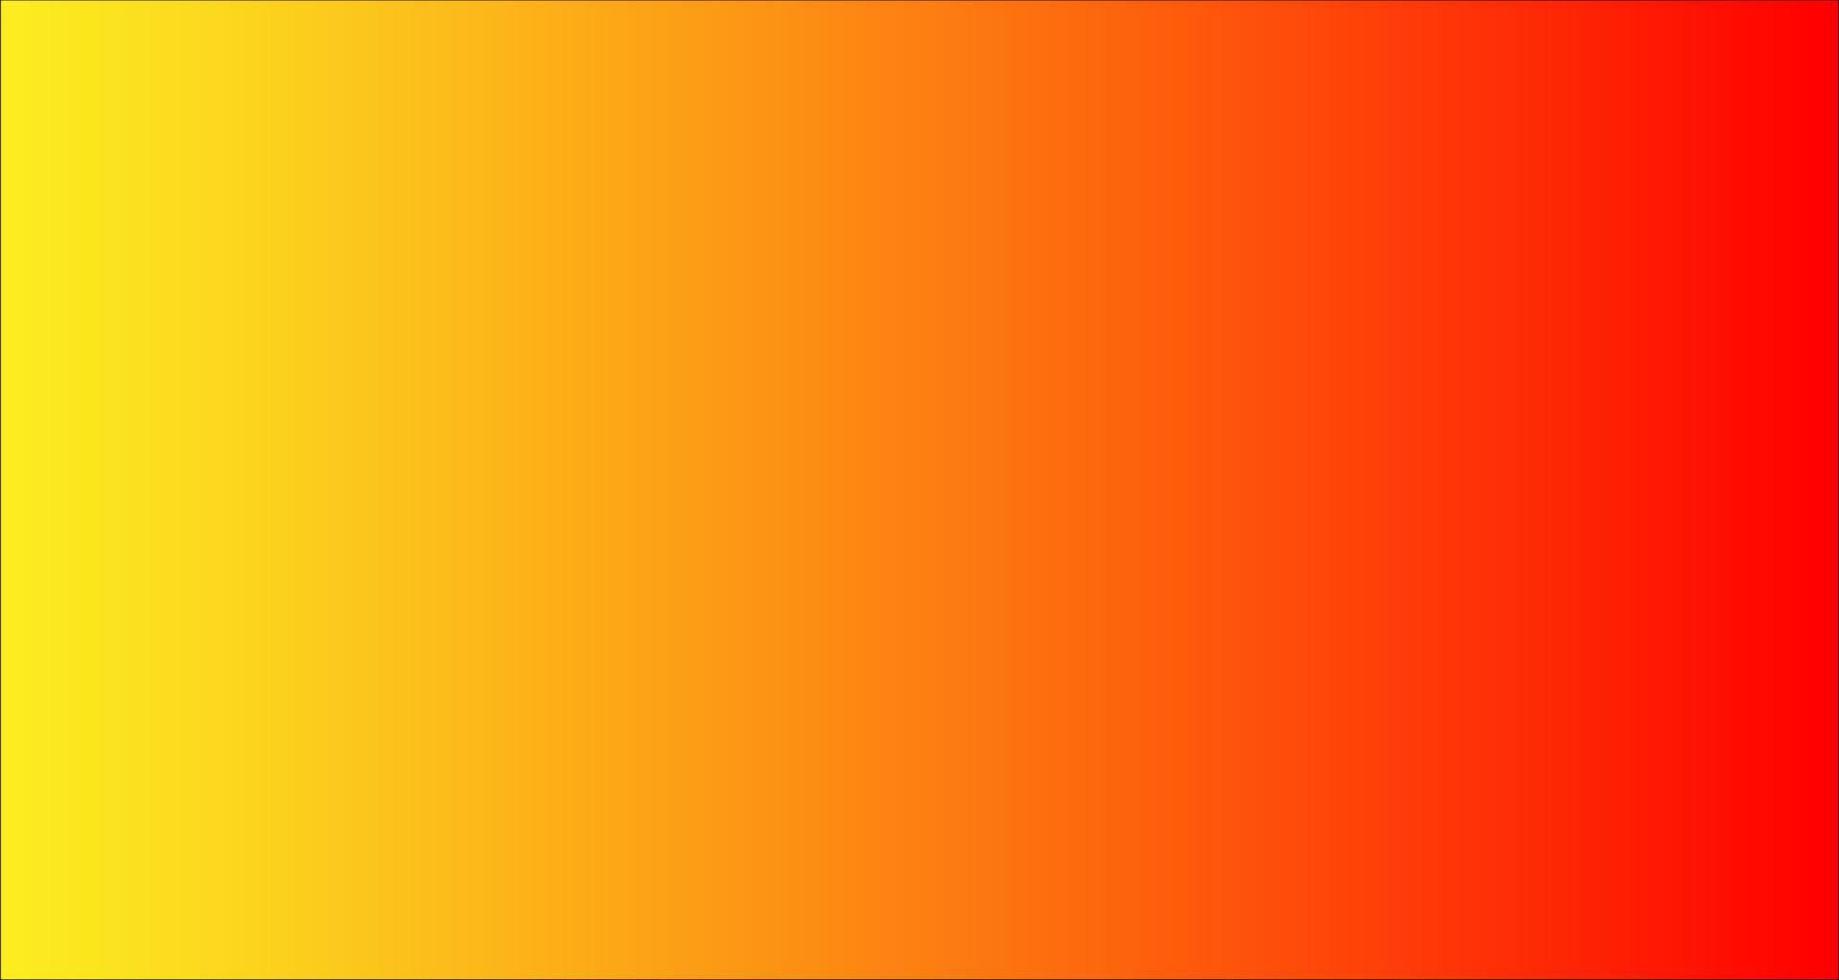 yellow and red beautiful background gradient color vector